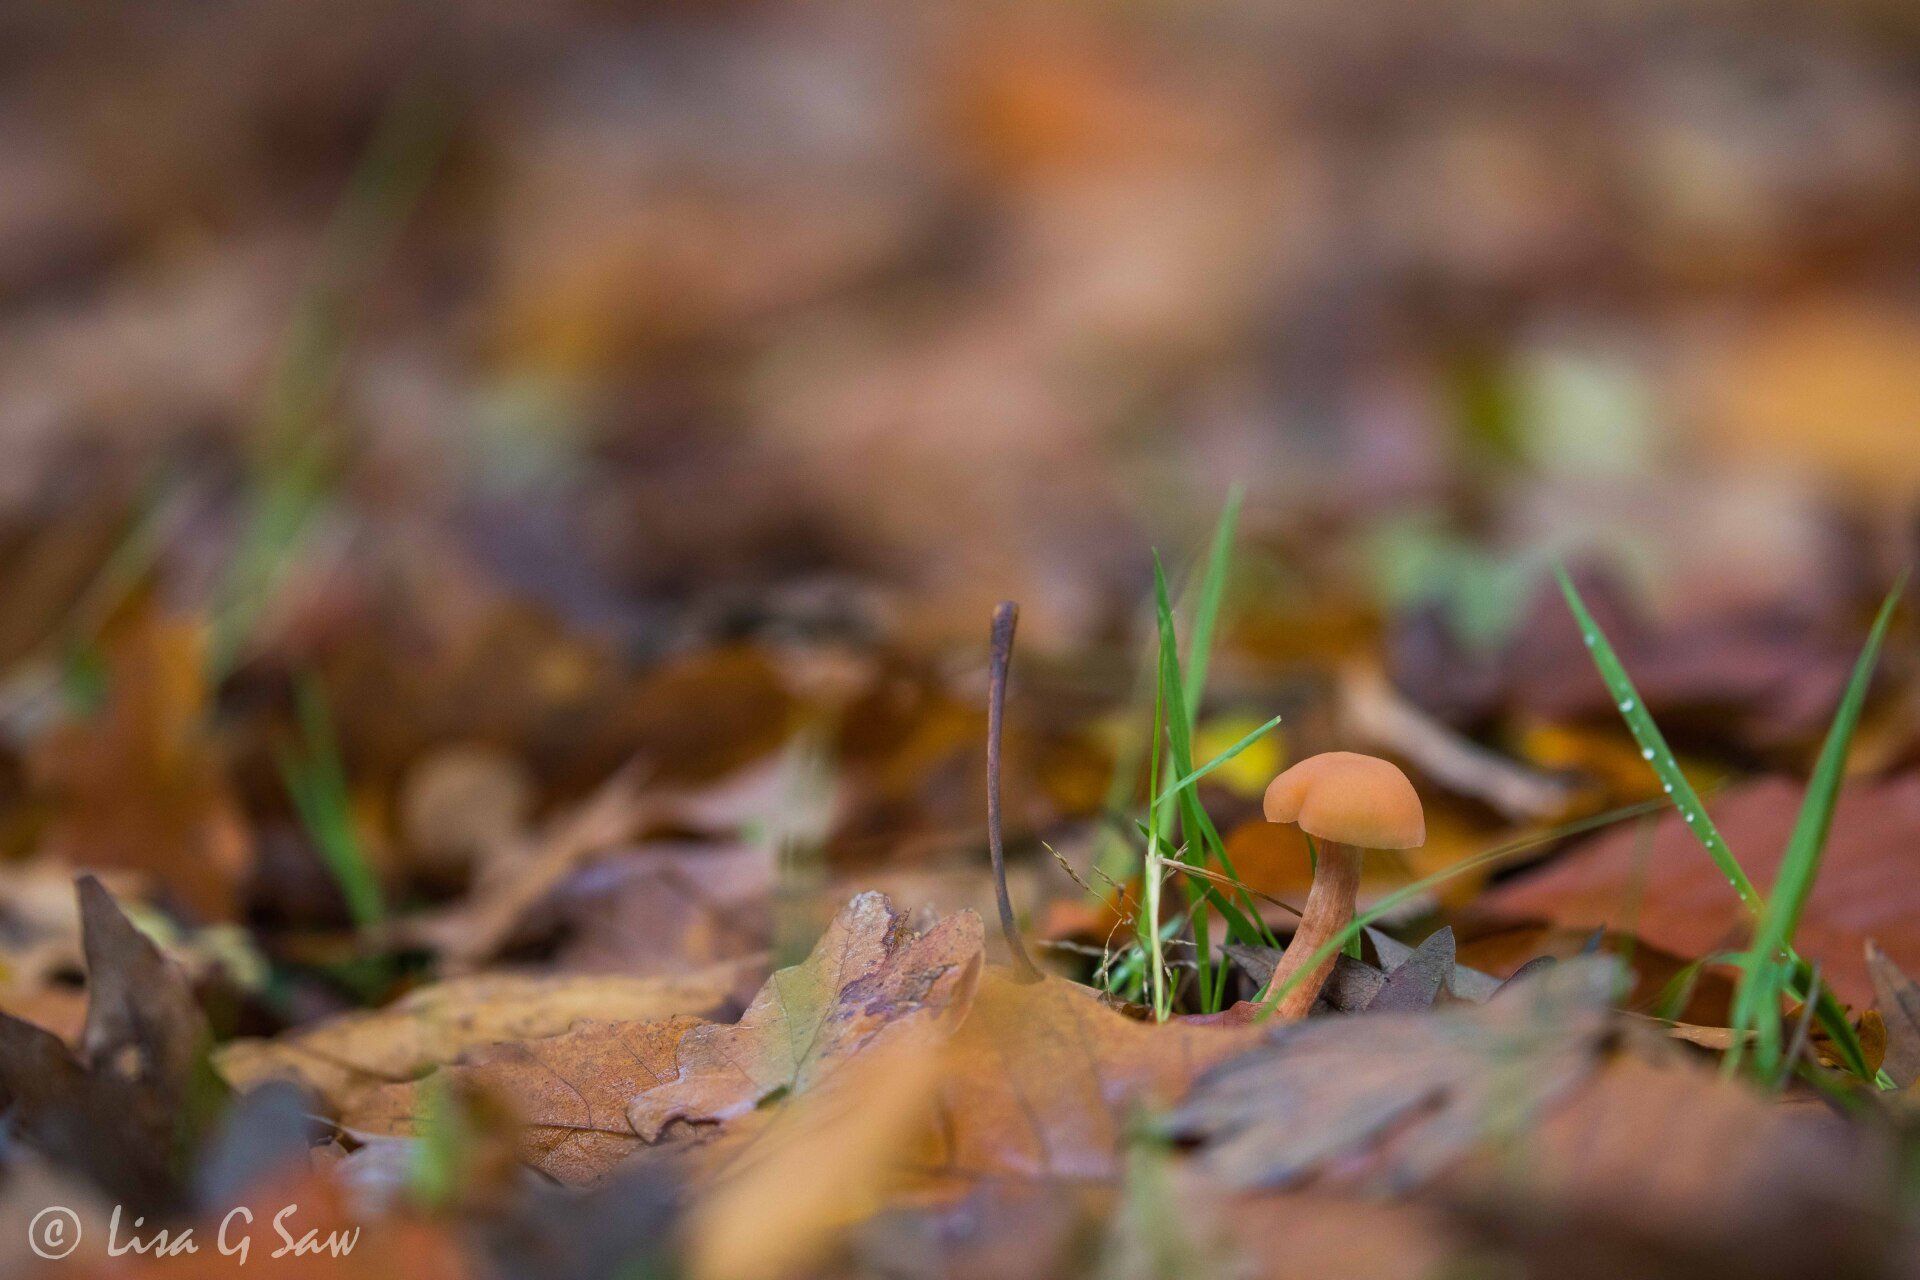 Small orange coloured fungus growing out of leaf litter